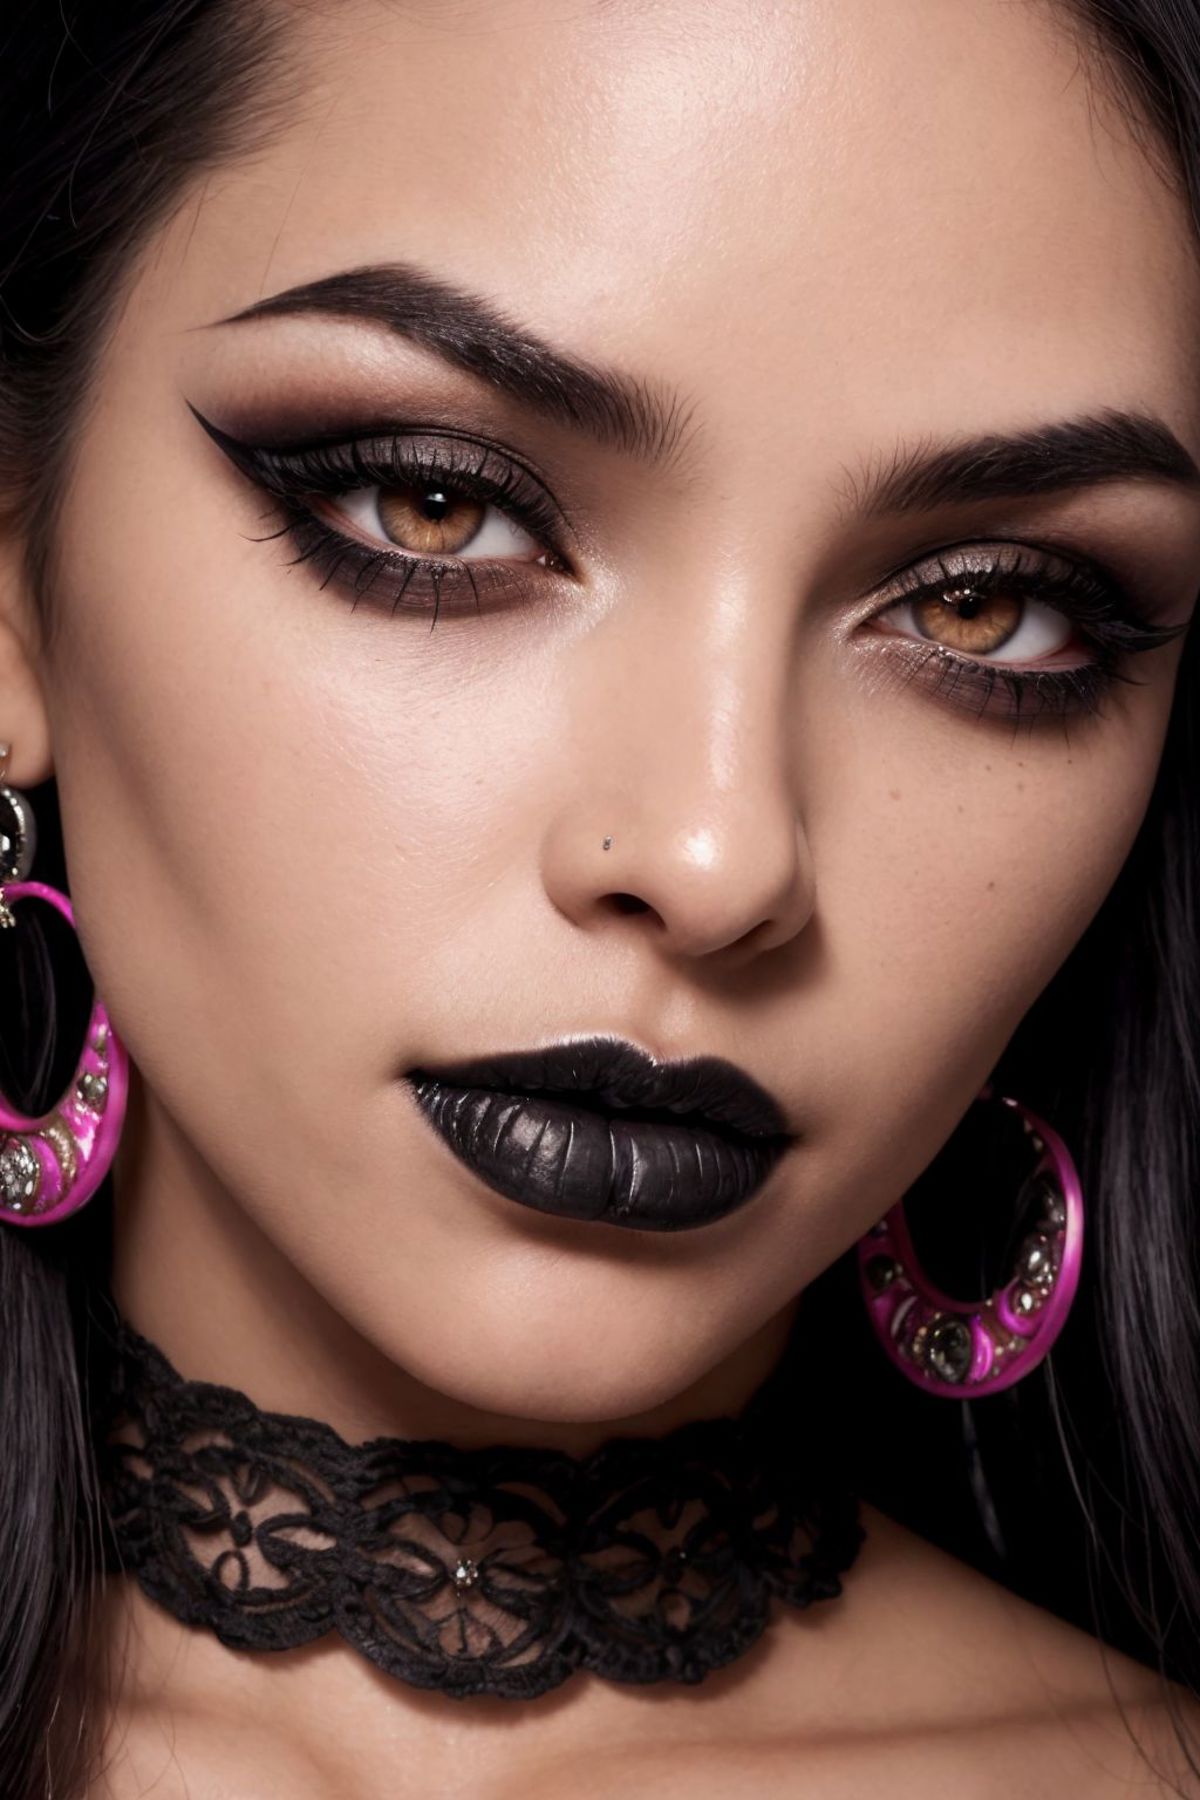 A Woman with Black Lipstick and Pink Rings on Her Ears.